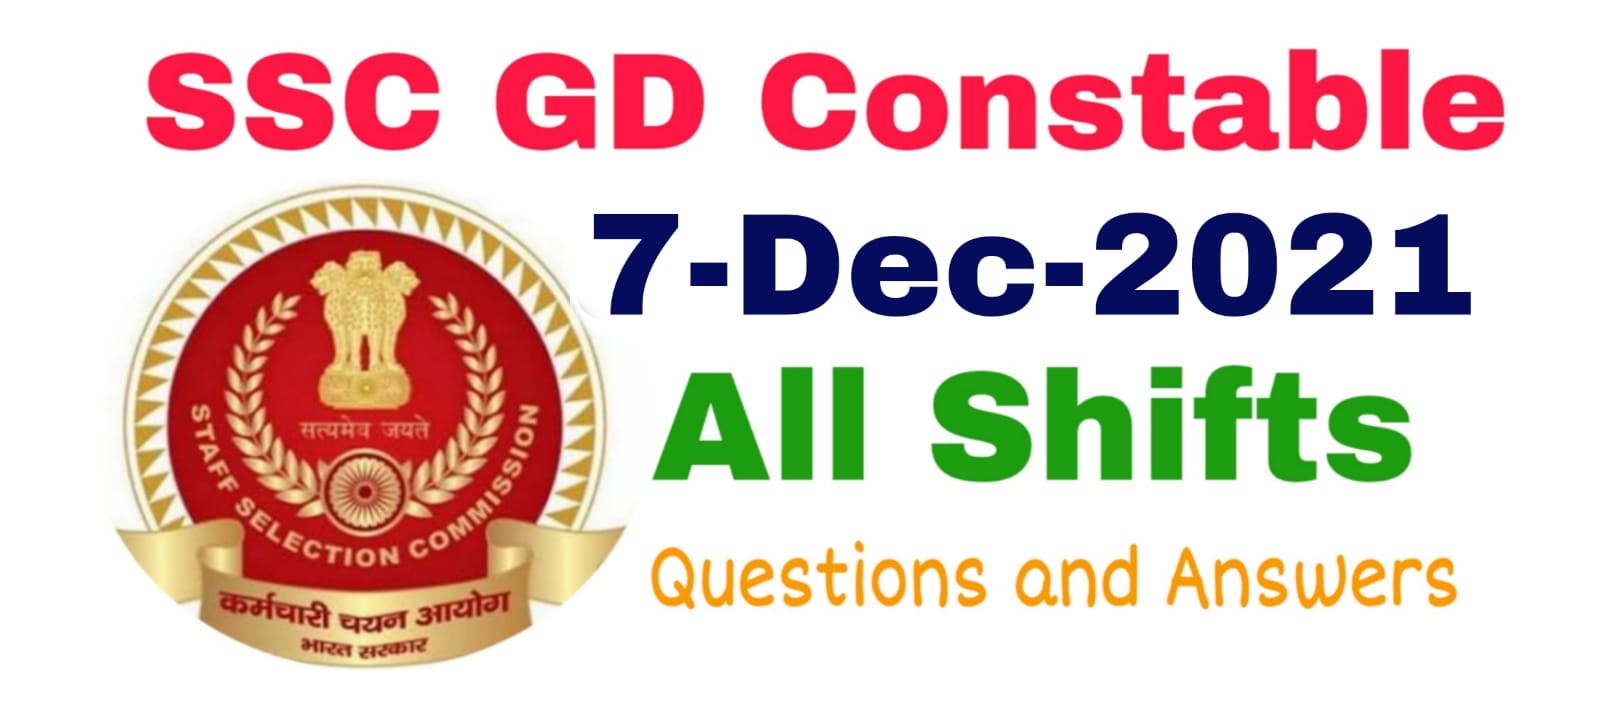 SSC GD 7 December 2021 All Shift Questions and Answers